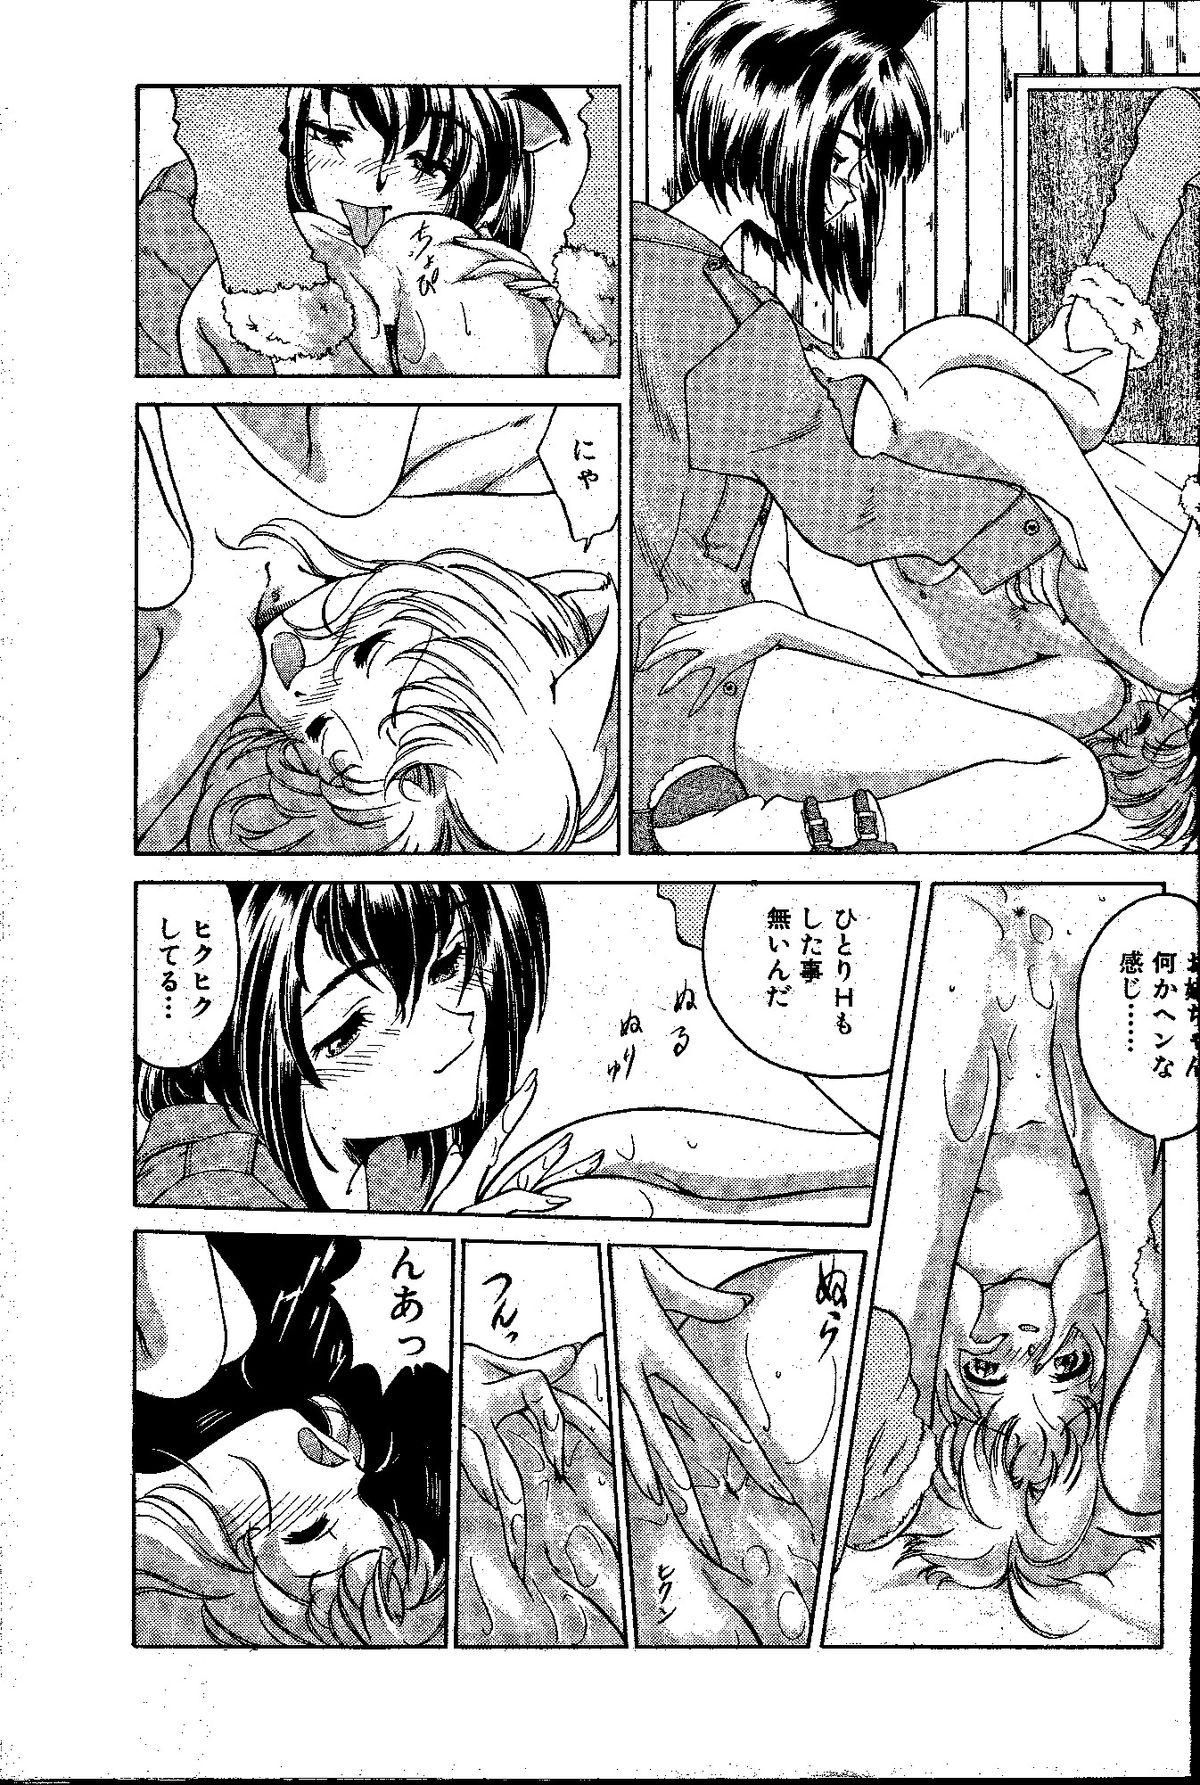 Free Rough Sex Porn nyan-a-kore [Last page has imperfect lines] Carro - Page 13